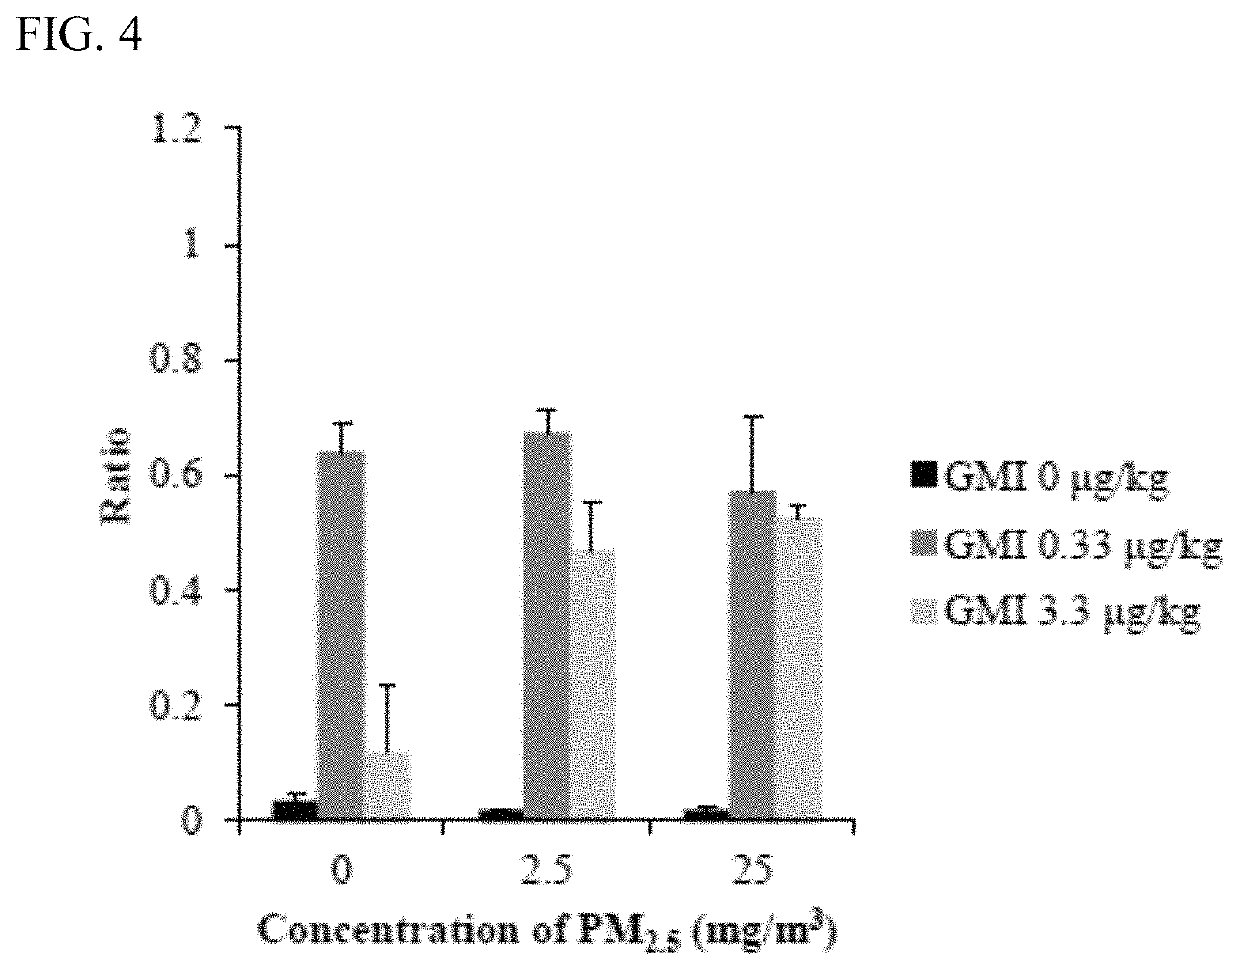 Use of an immunomodulatory protein in reducing damage caused by fine particulate matter